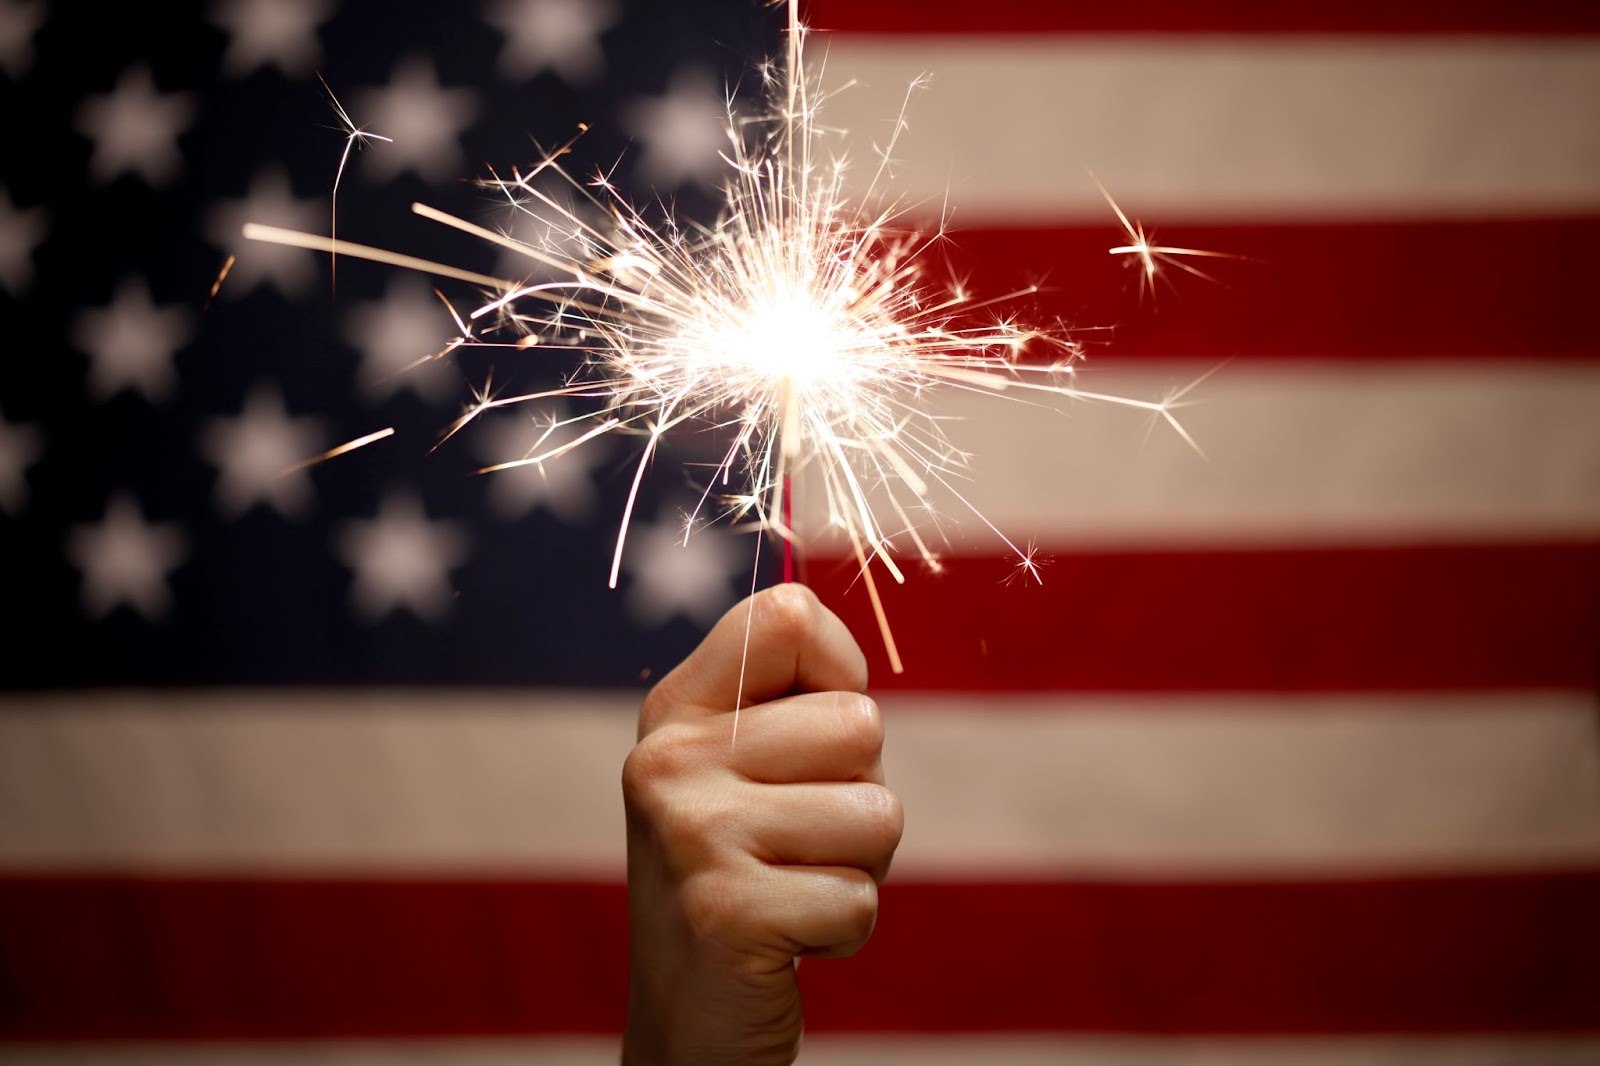 Hand holding sparkler in front of American flag, emphasizing fire safety.